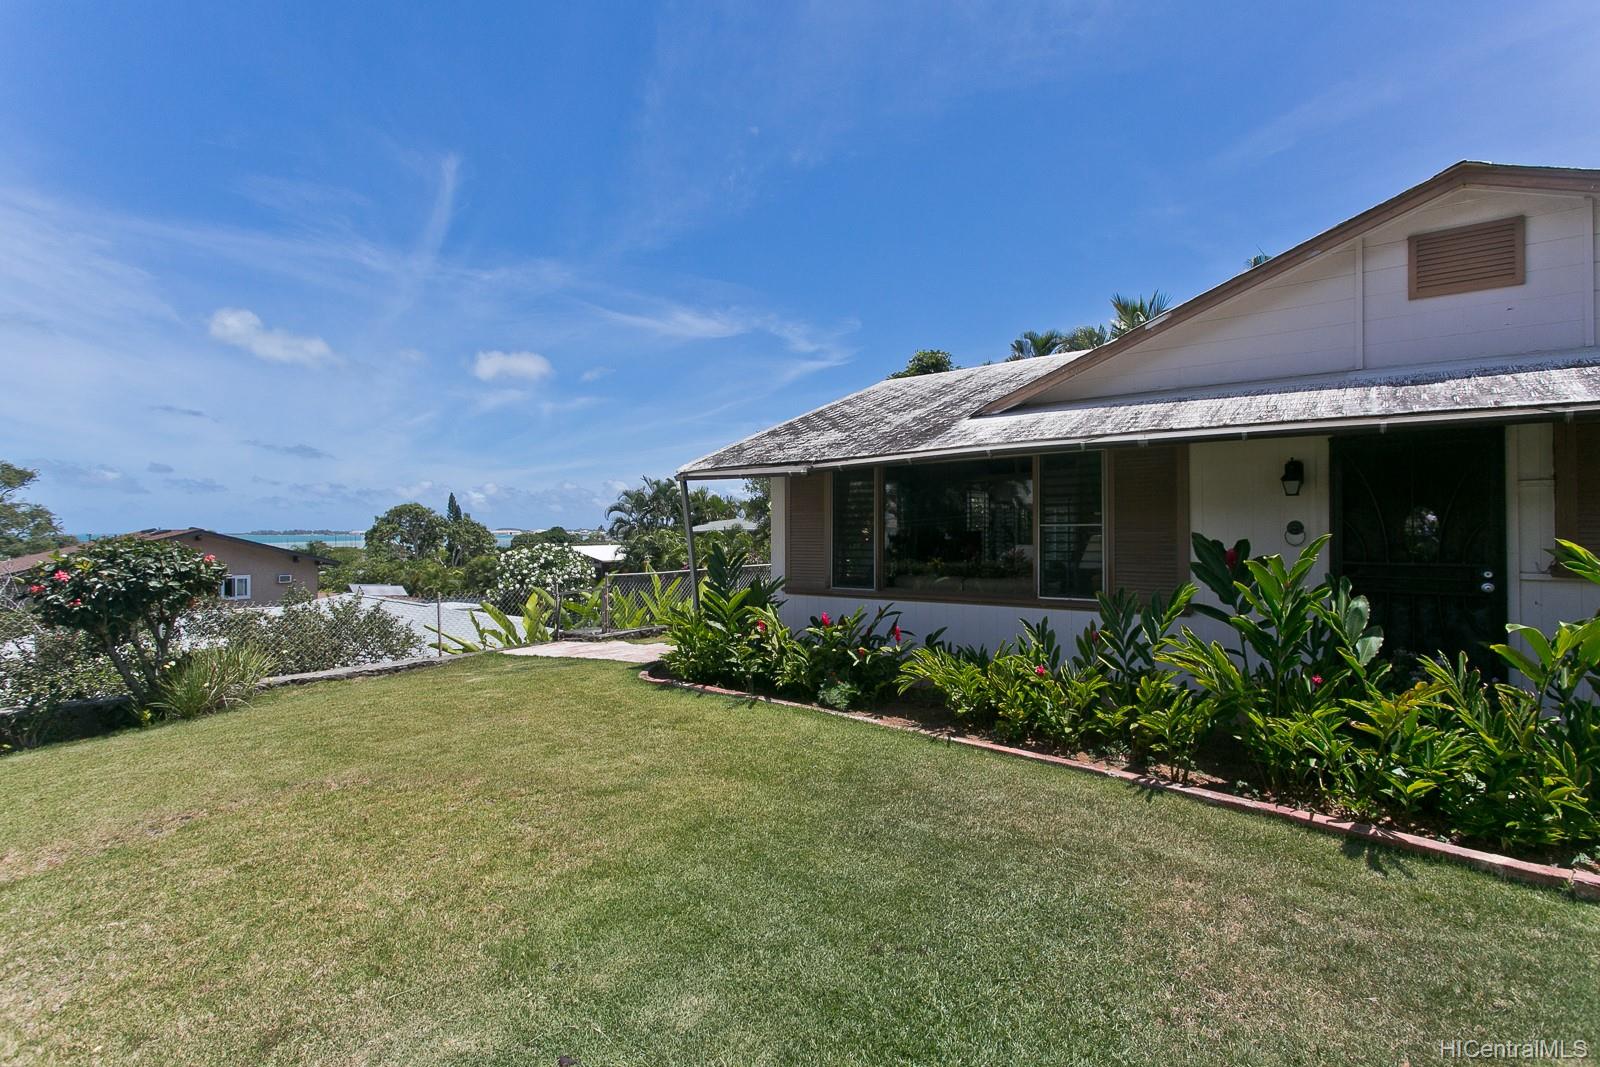  44-131 Bayview Haven Place Kaneohe, HI 96744